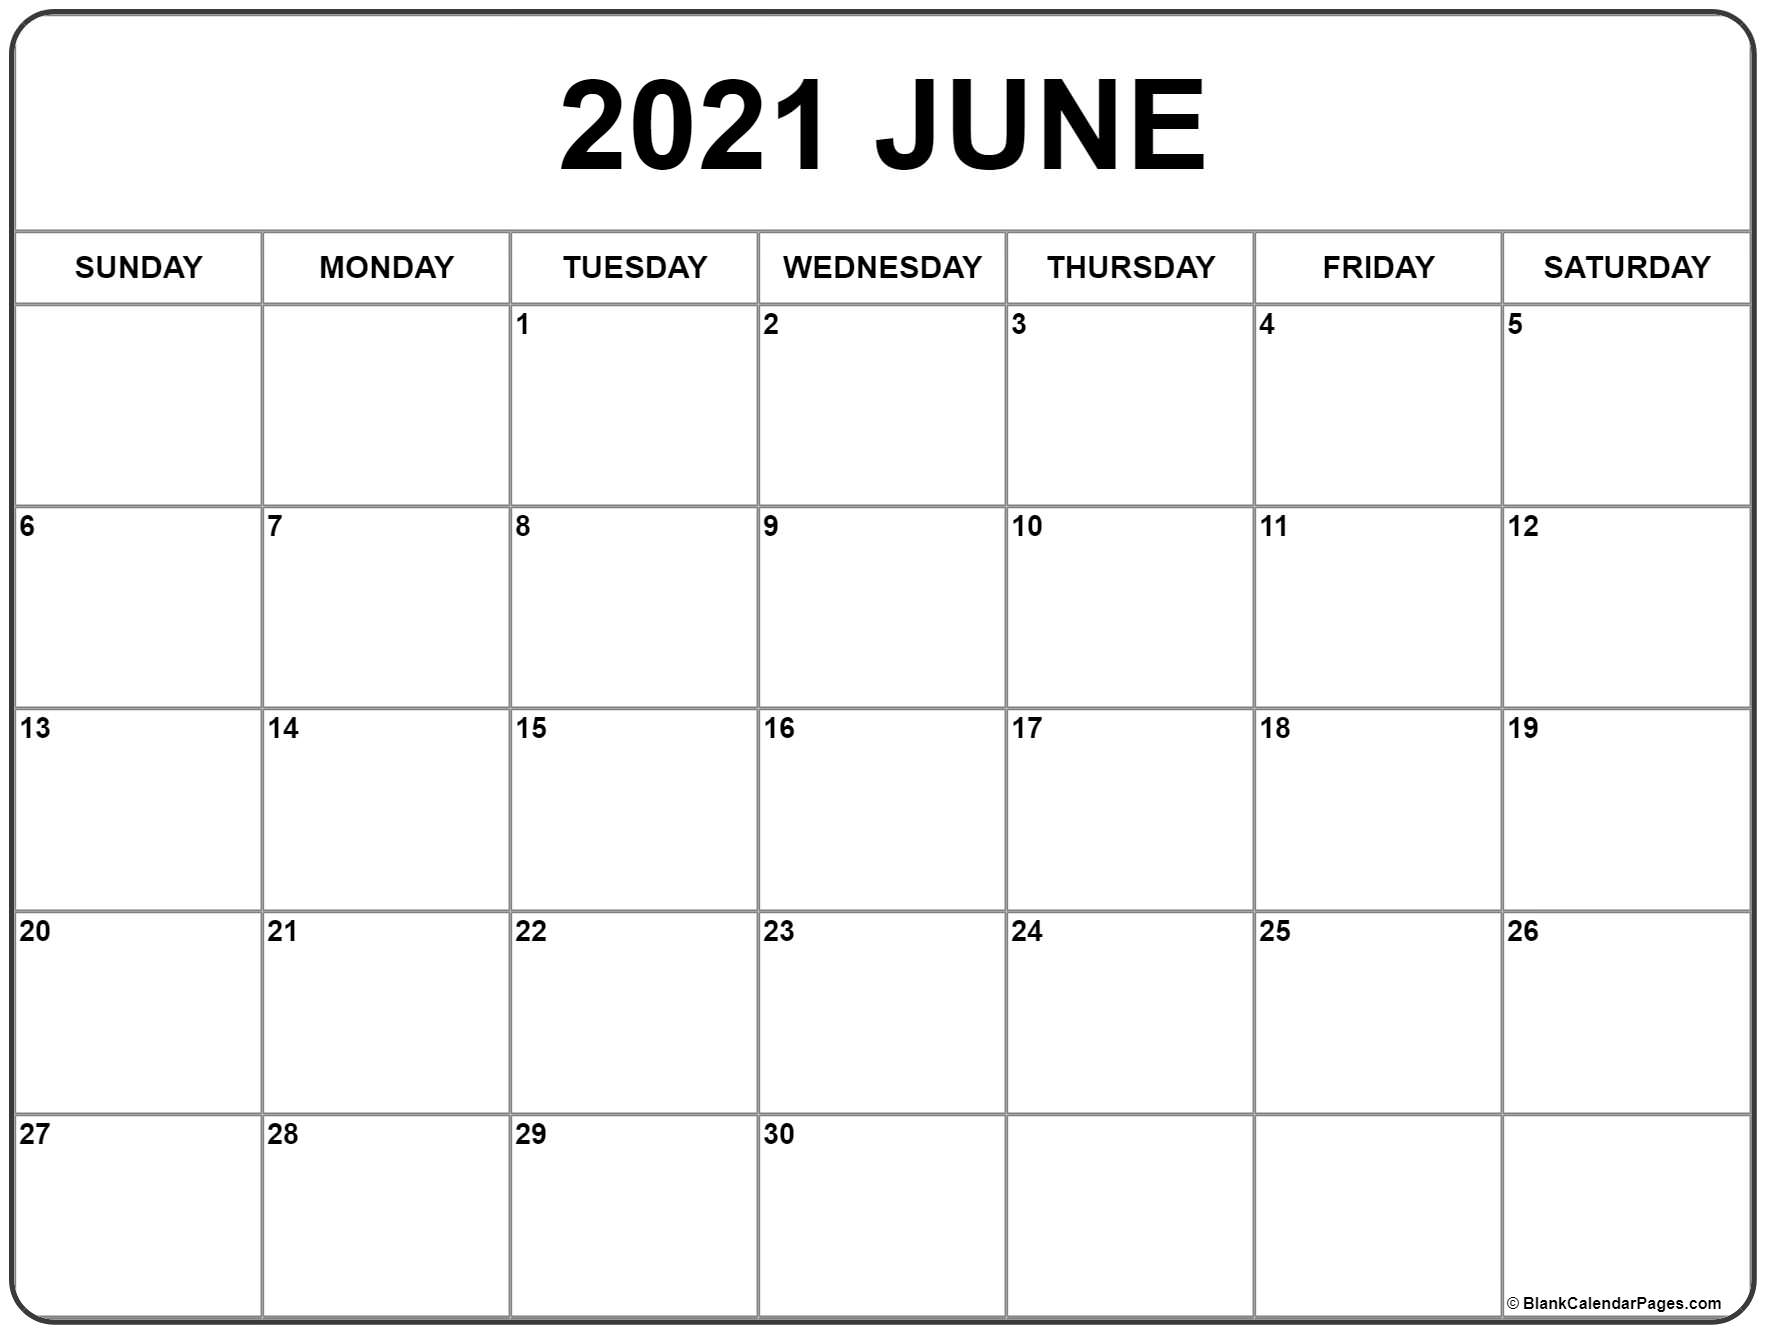 Pick 2021 June Calendars To Print Without Downloading